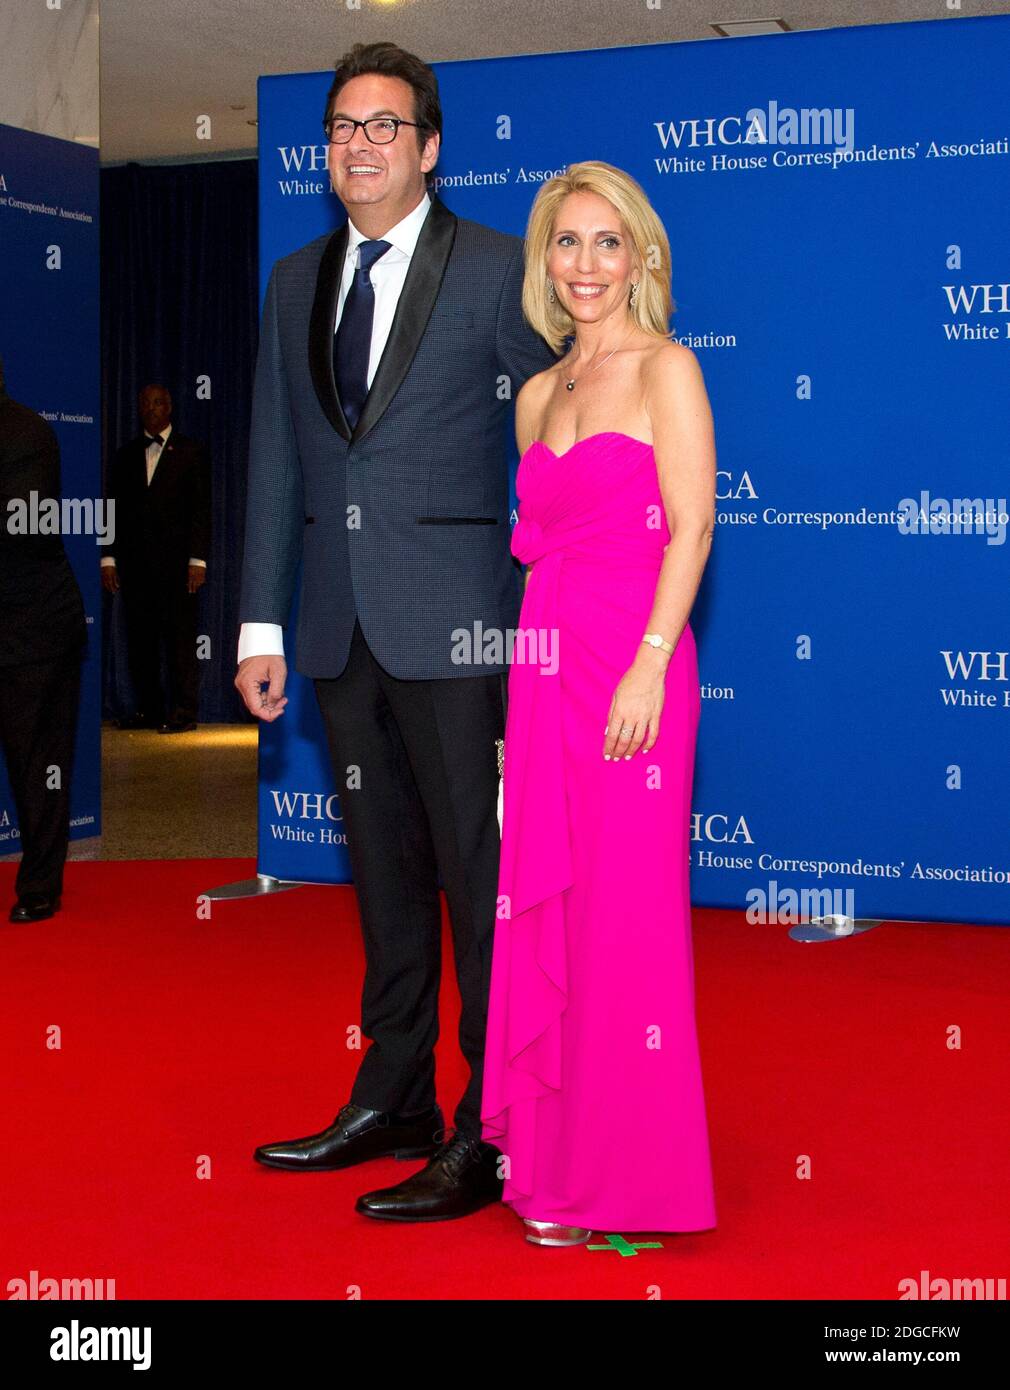 Marc Adelman and Dana Bash arrive for the 2017 White House Correspondents  Association Annual Dinner at the Washington Hilton Hotel in Washington, DC,  USA, on Saturday April 29, 2017. Photo by Ron